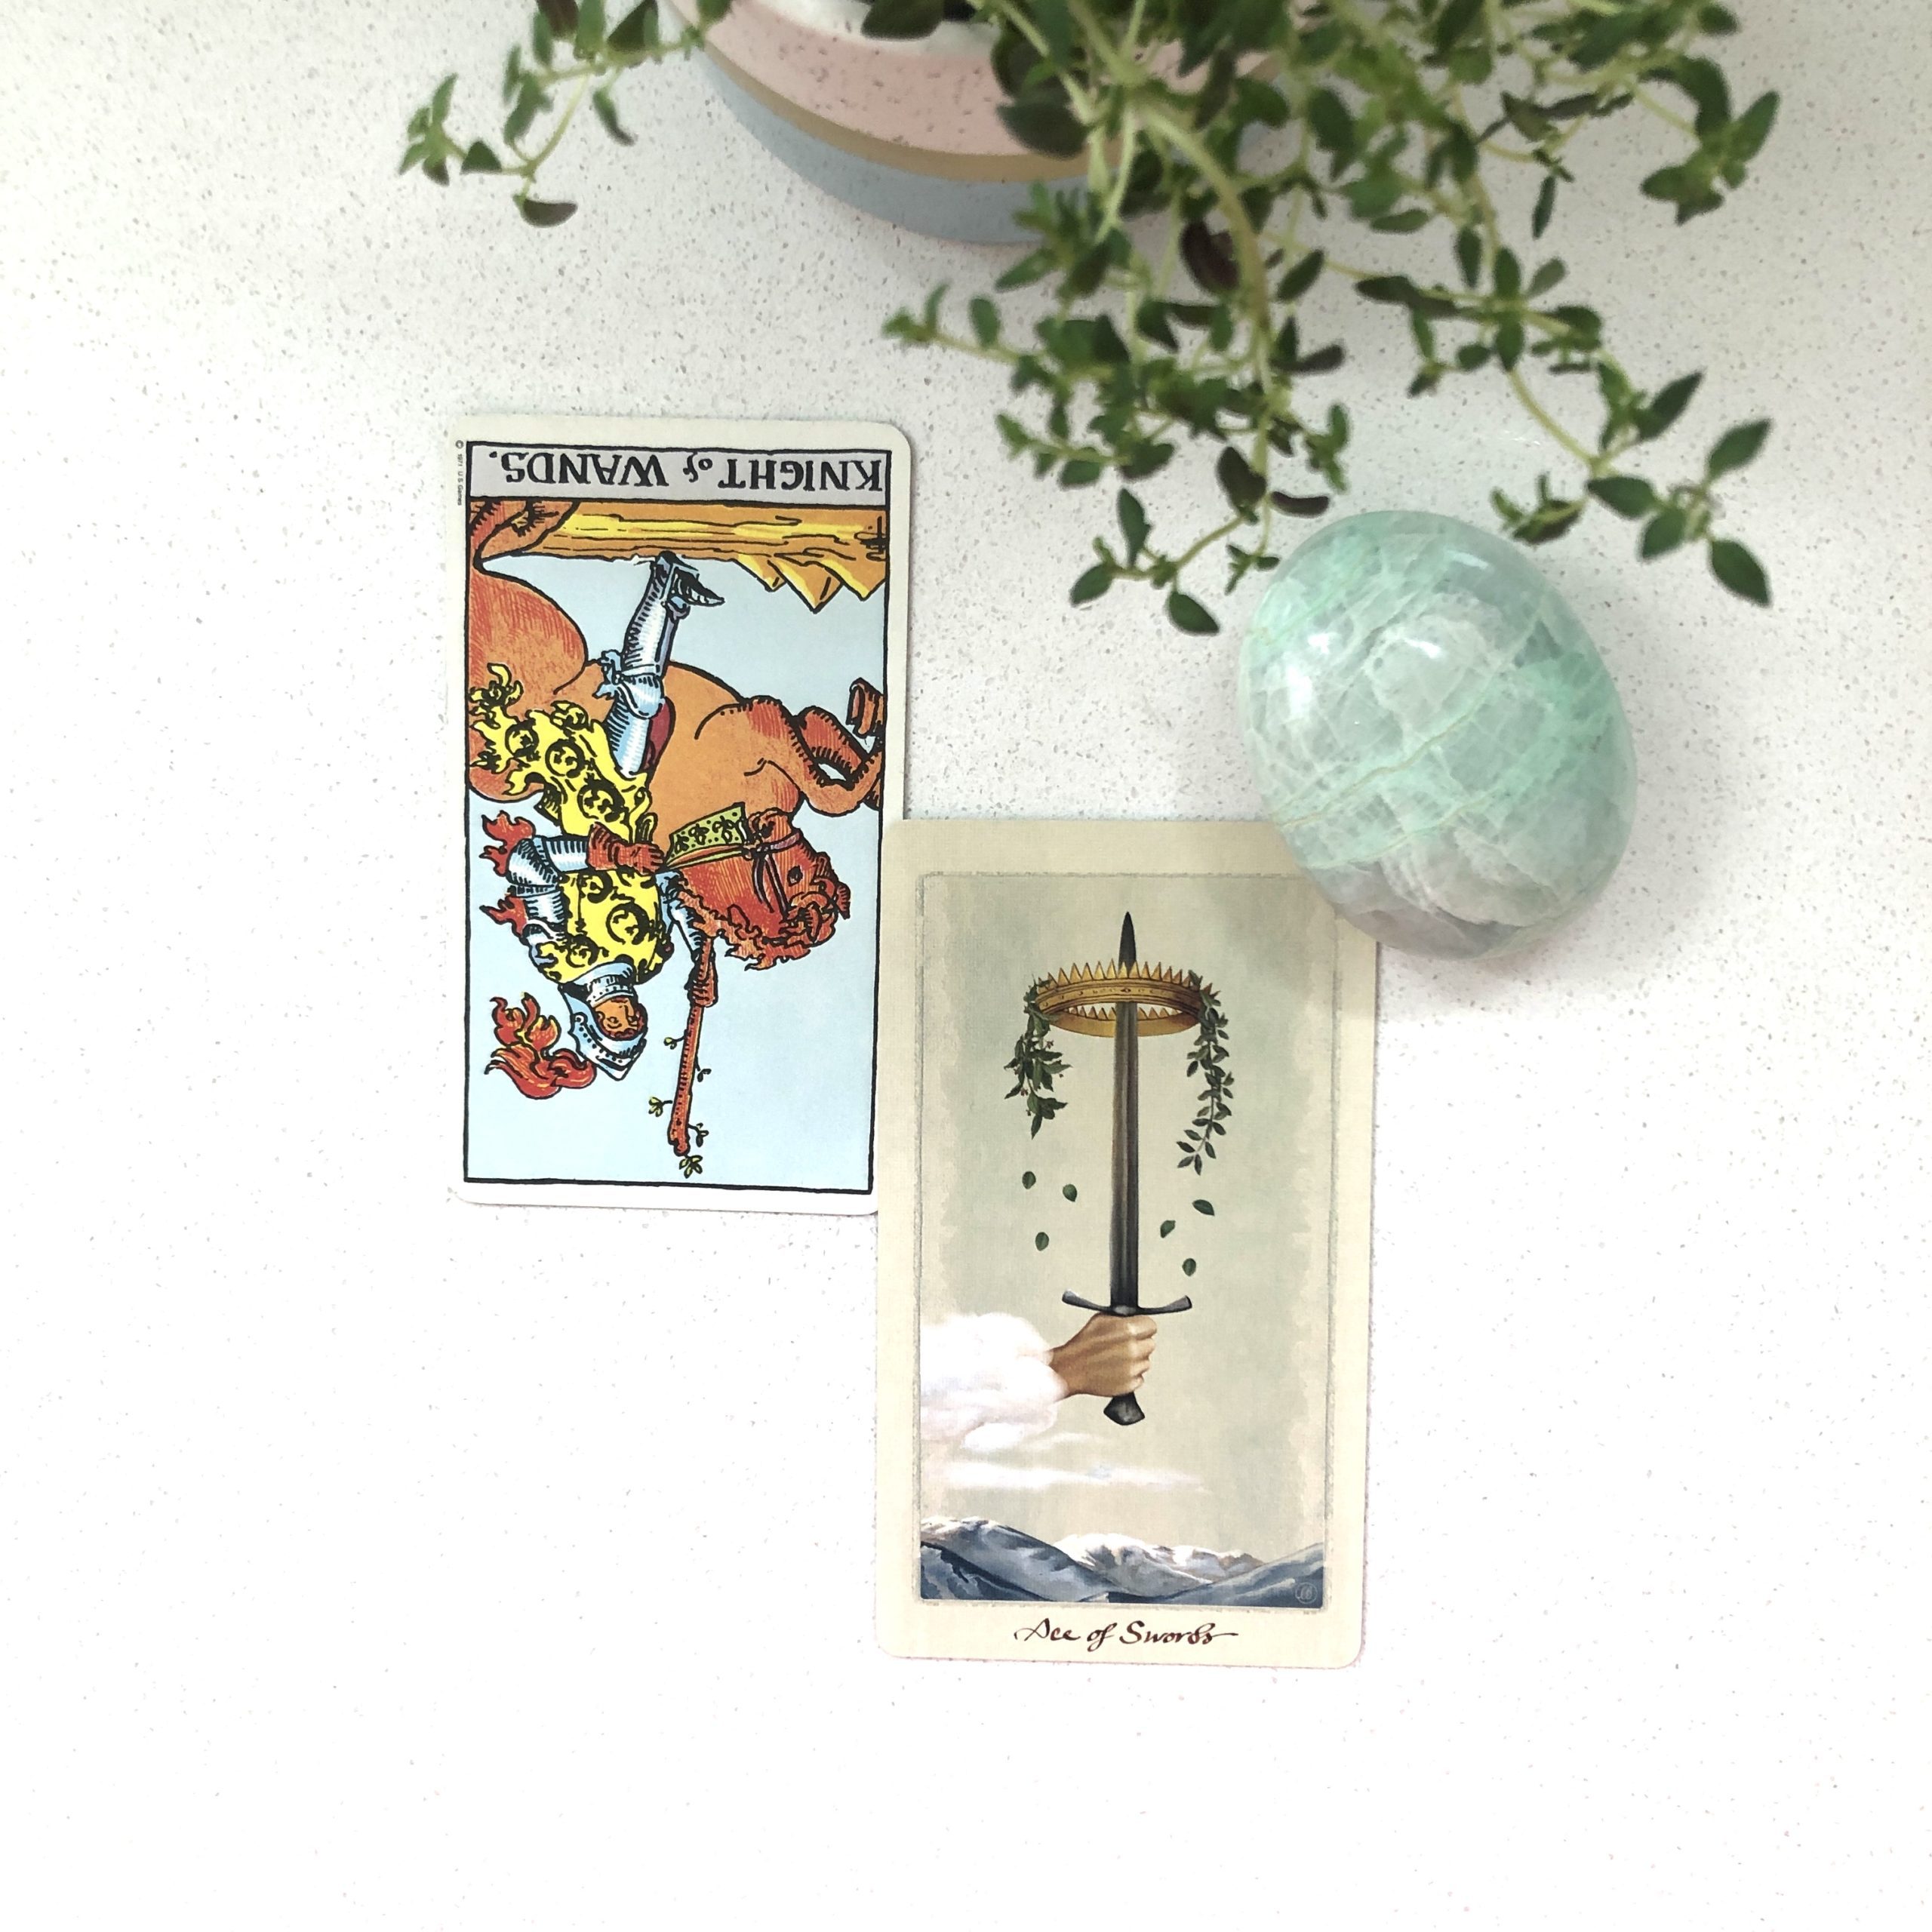 Tarot spread with the fool and the ace of swords